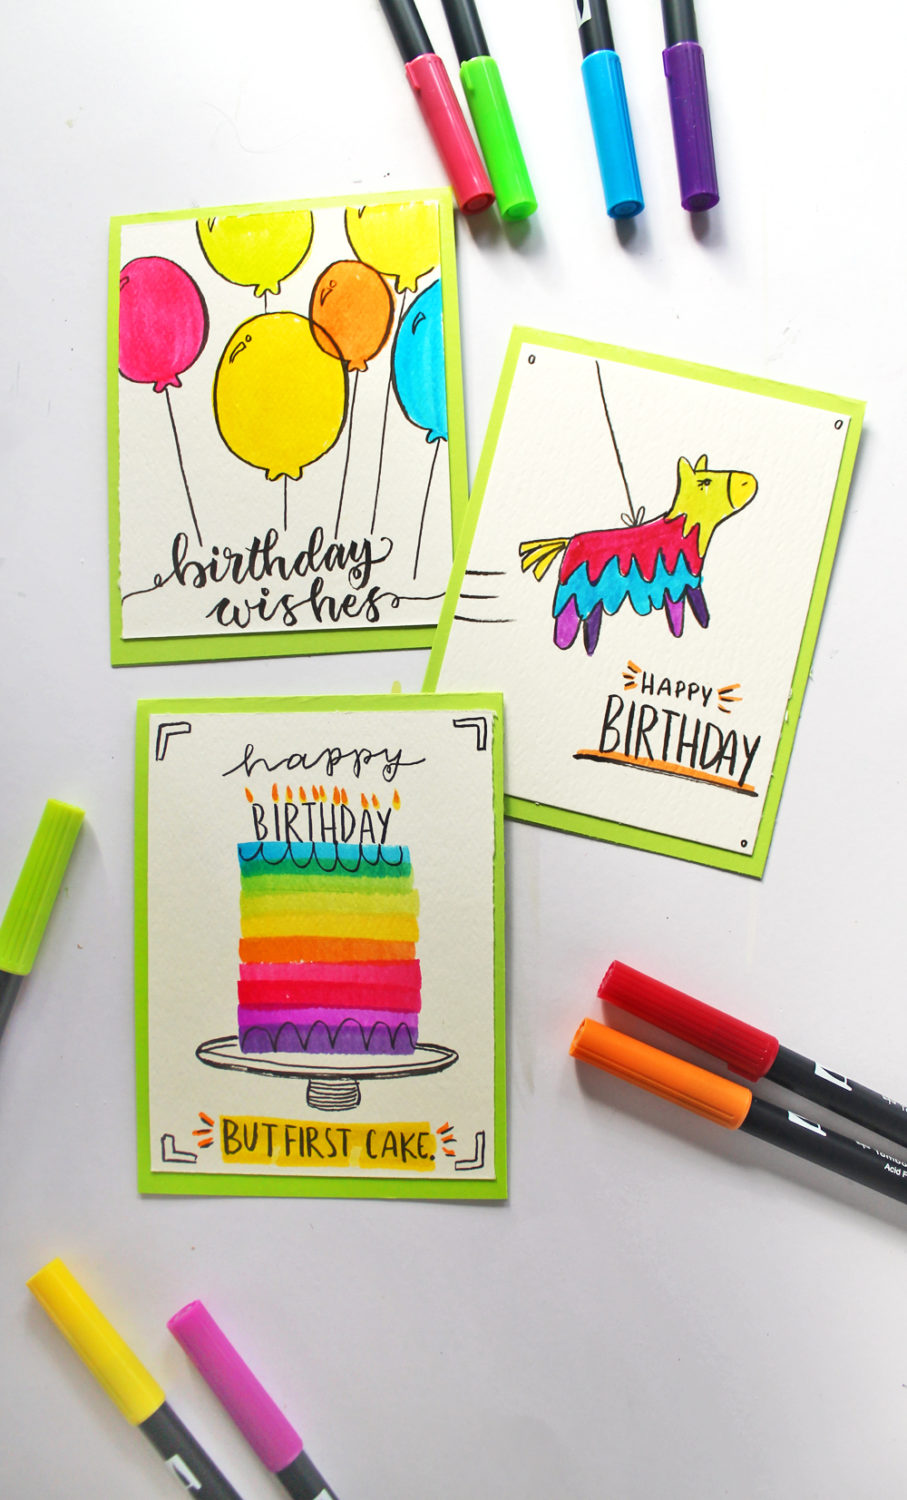 3 Birthday Cards You Can Make in Under 5 Minutes - Tombow USA Blog